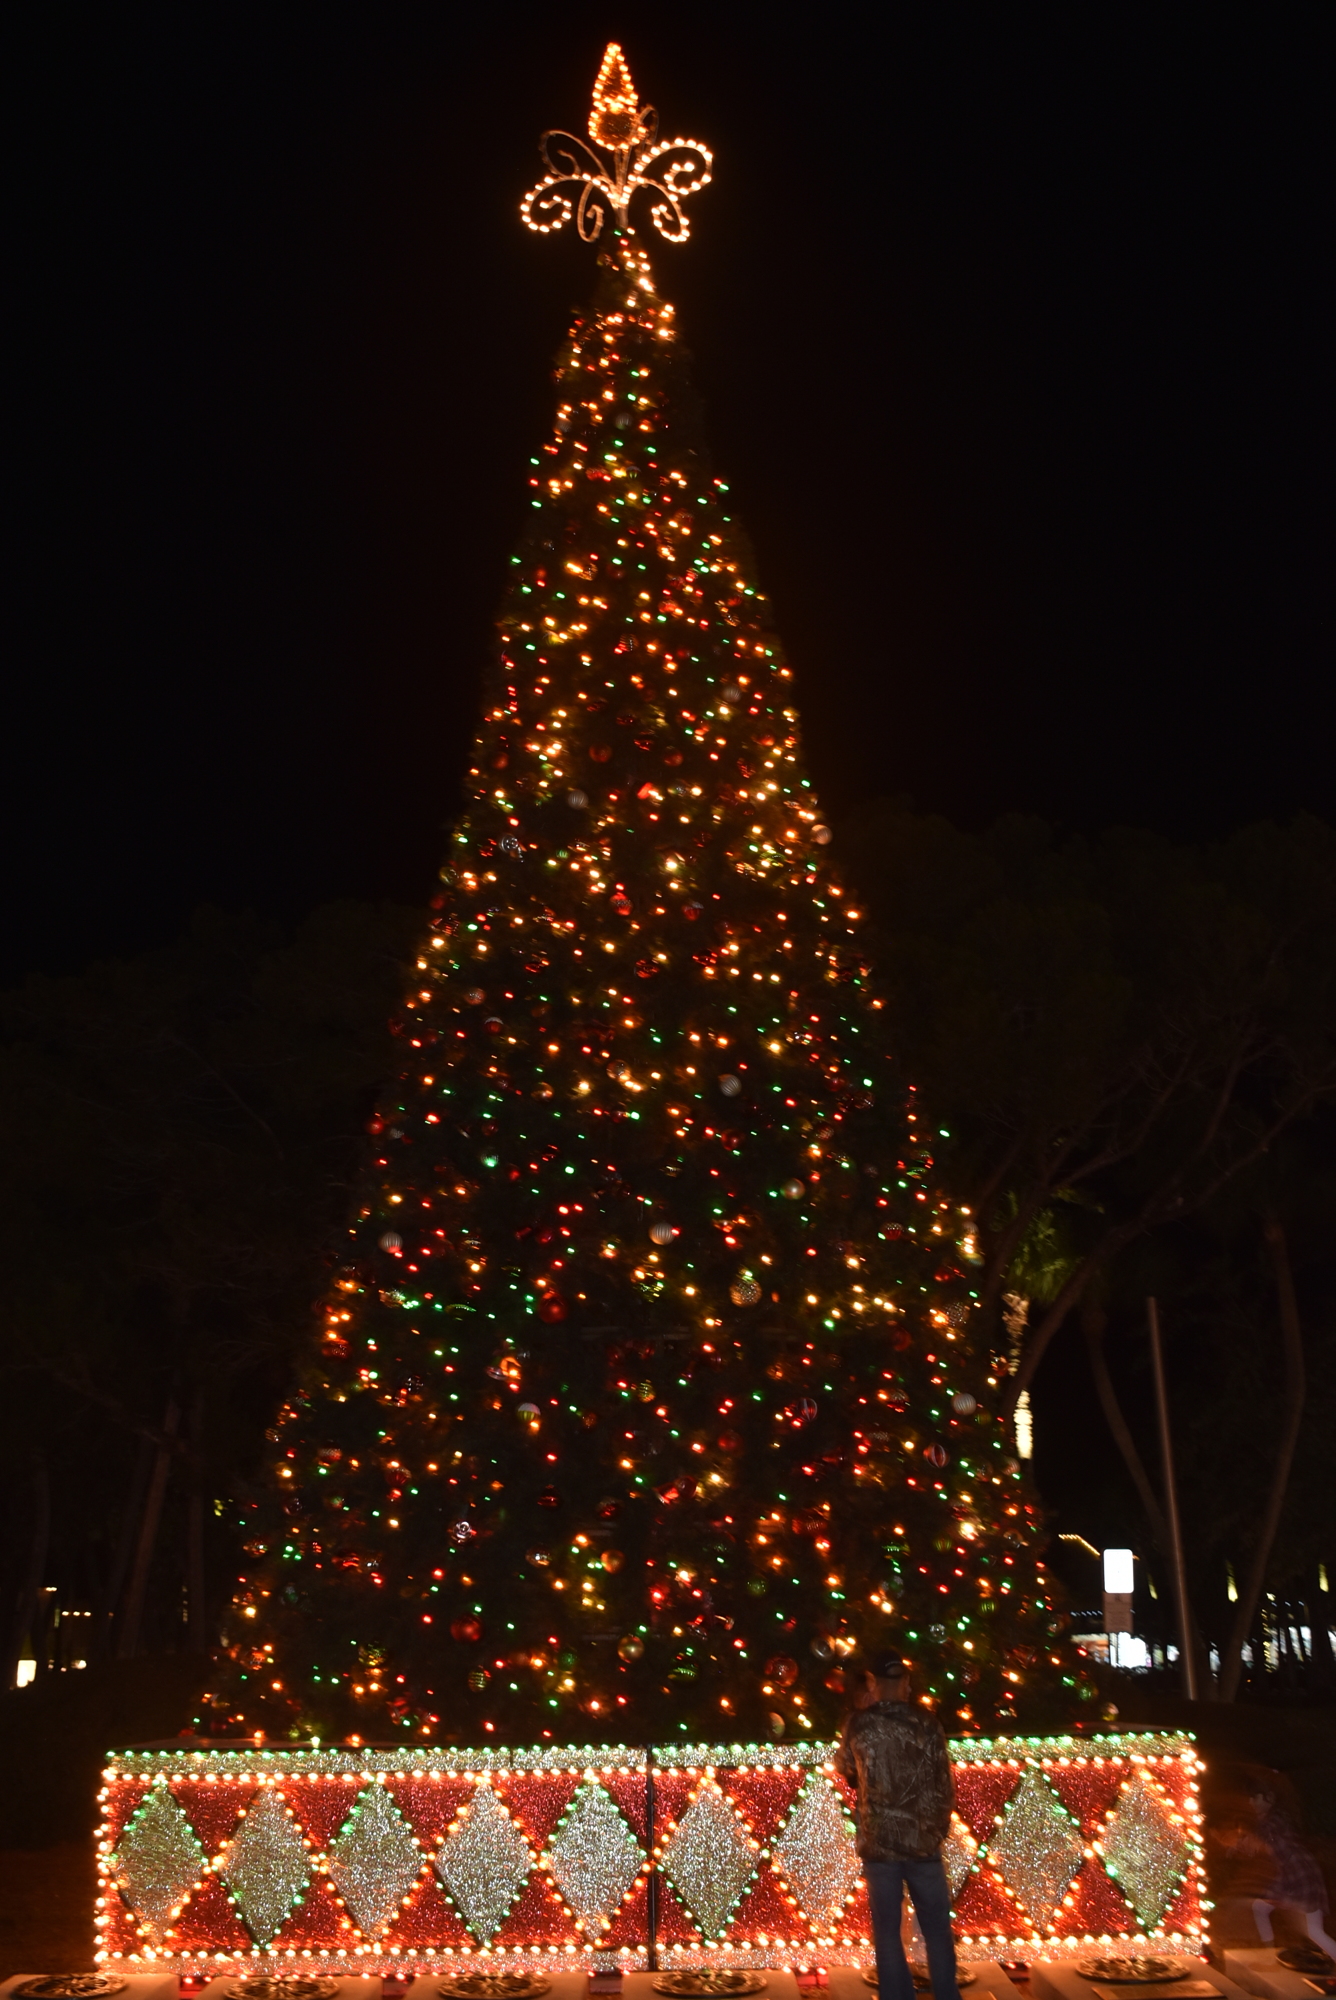 The 55-foot tree on St. Armands Circle is always a favorite.